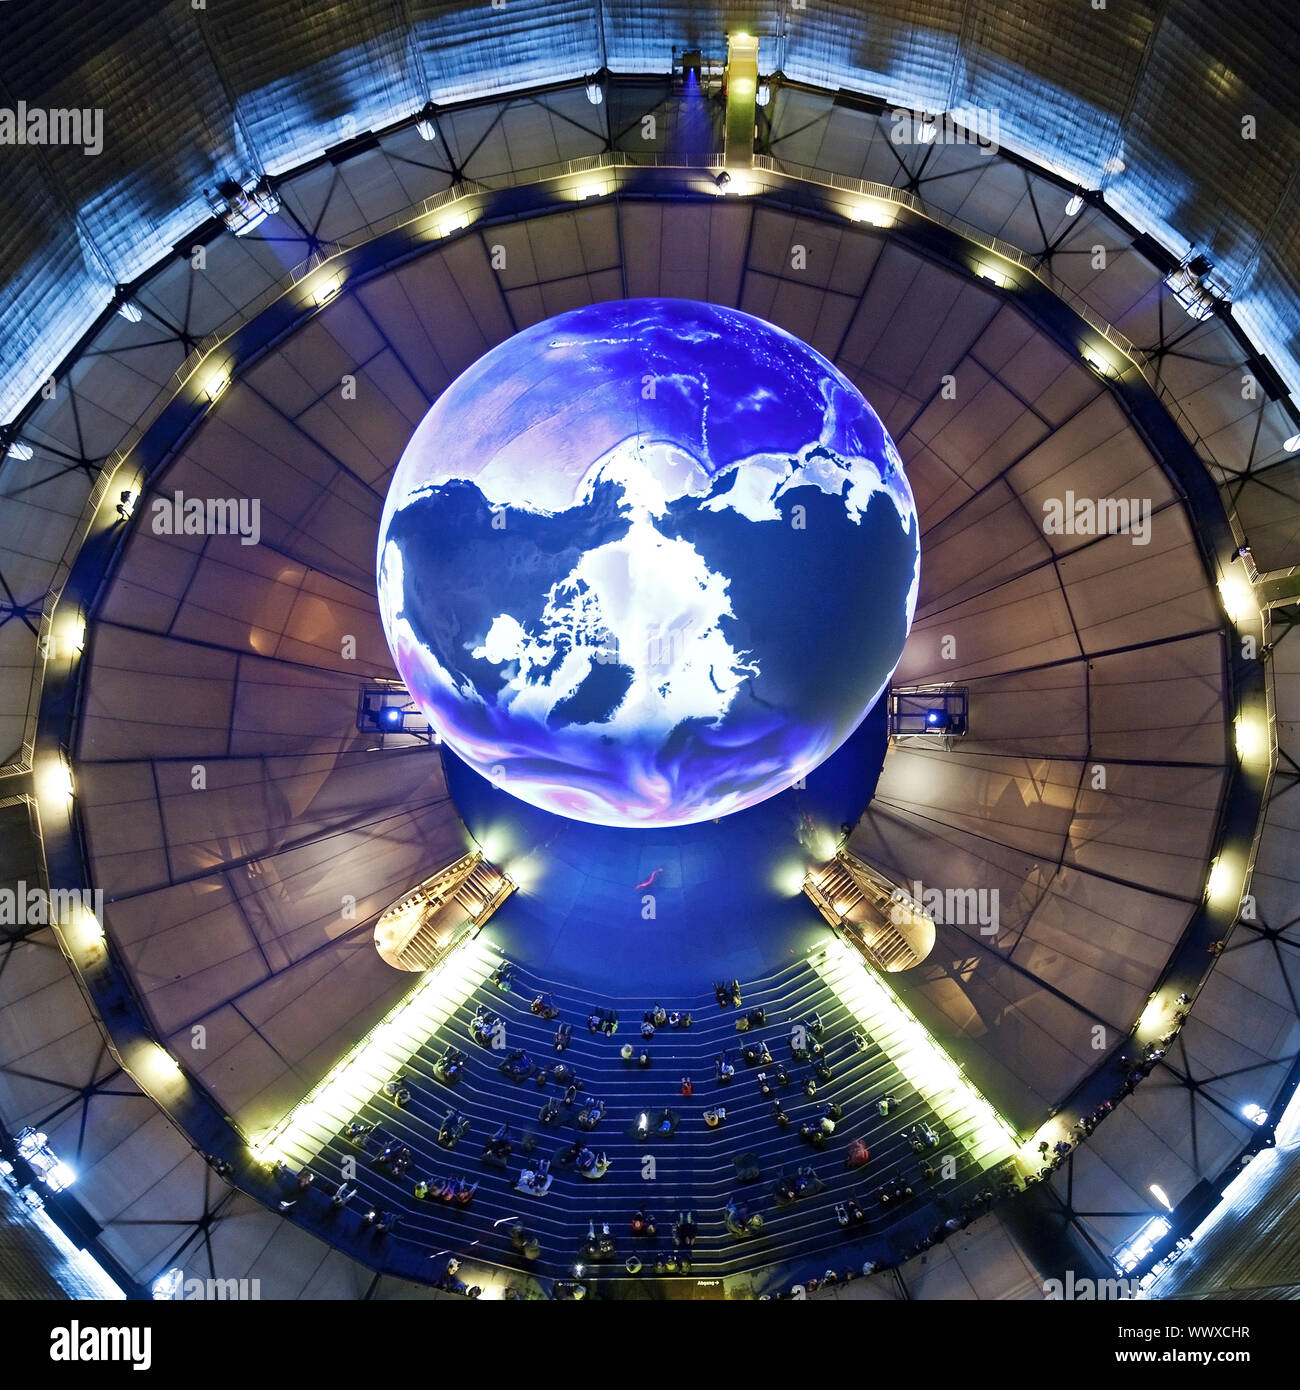 View from above on the globe in the exhibition wonders of nature, Gasometer, Oberhausen, Germany Stock Photo